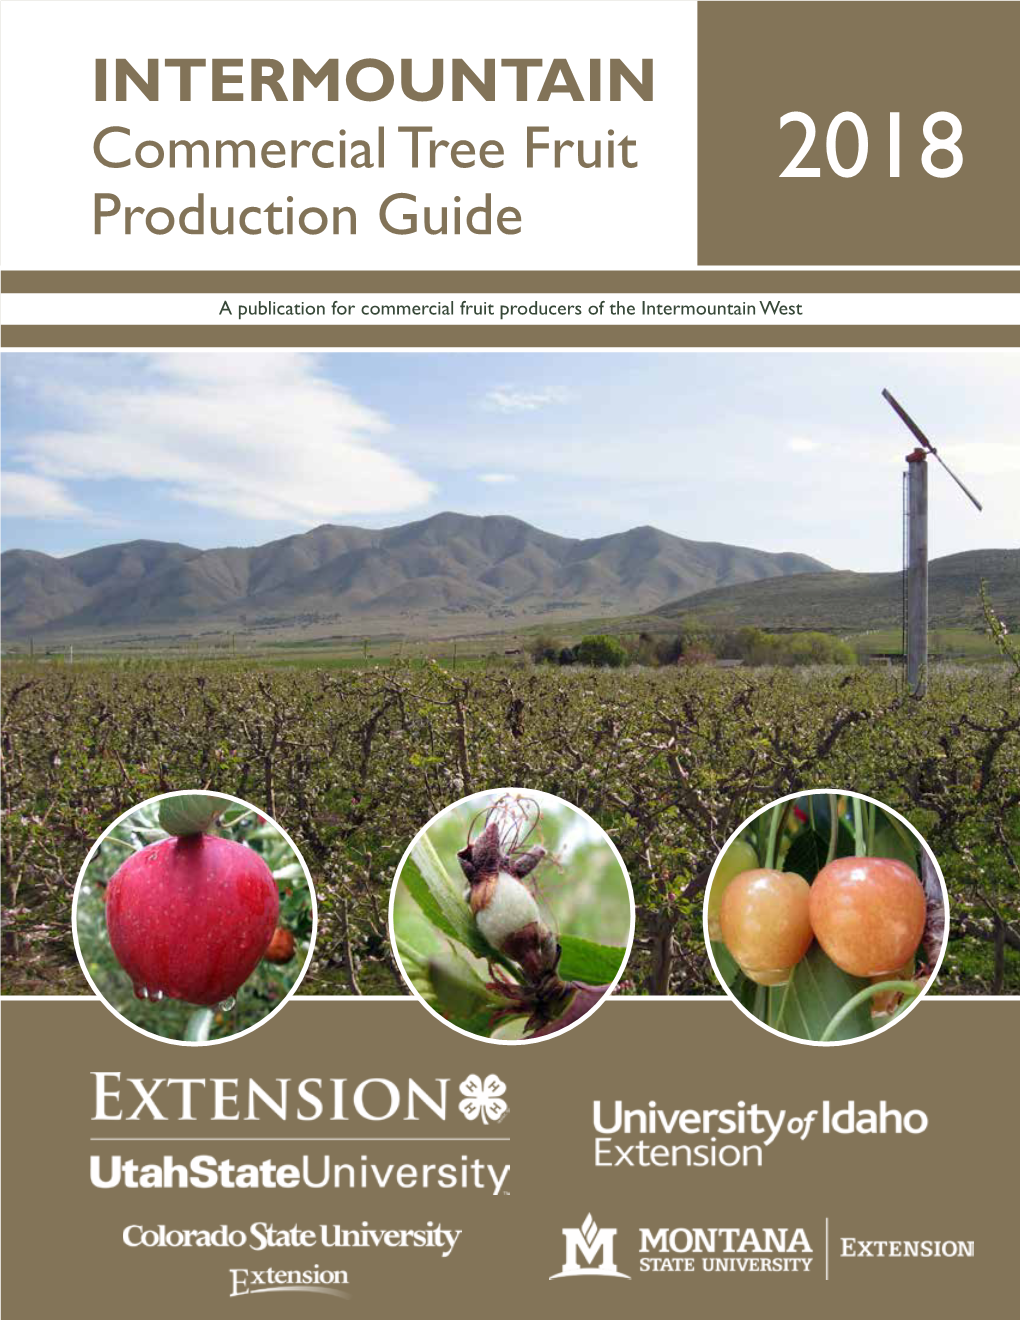 INTERMOUNTAIN Commercial Tree Fruit 2018 Production Guide